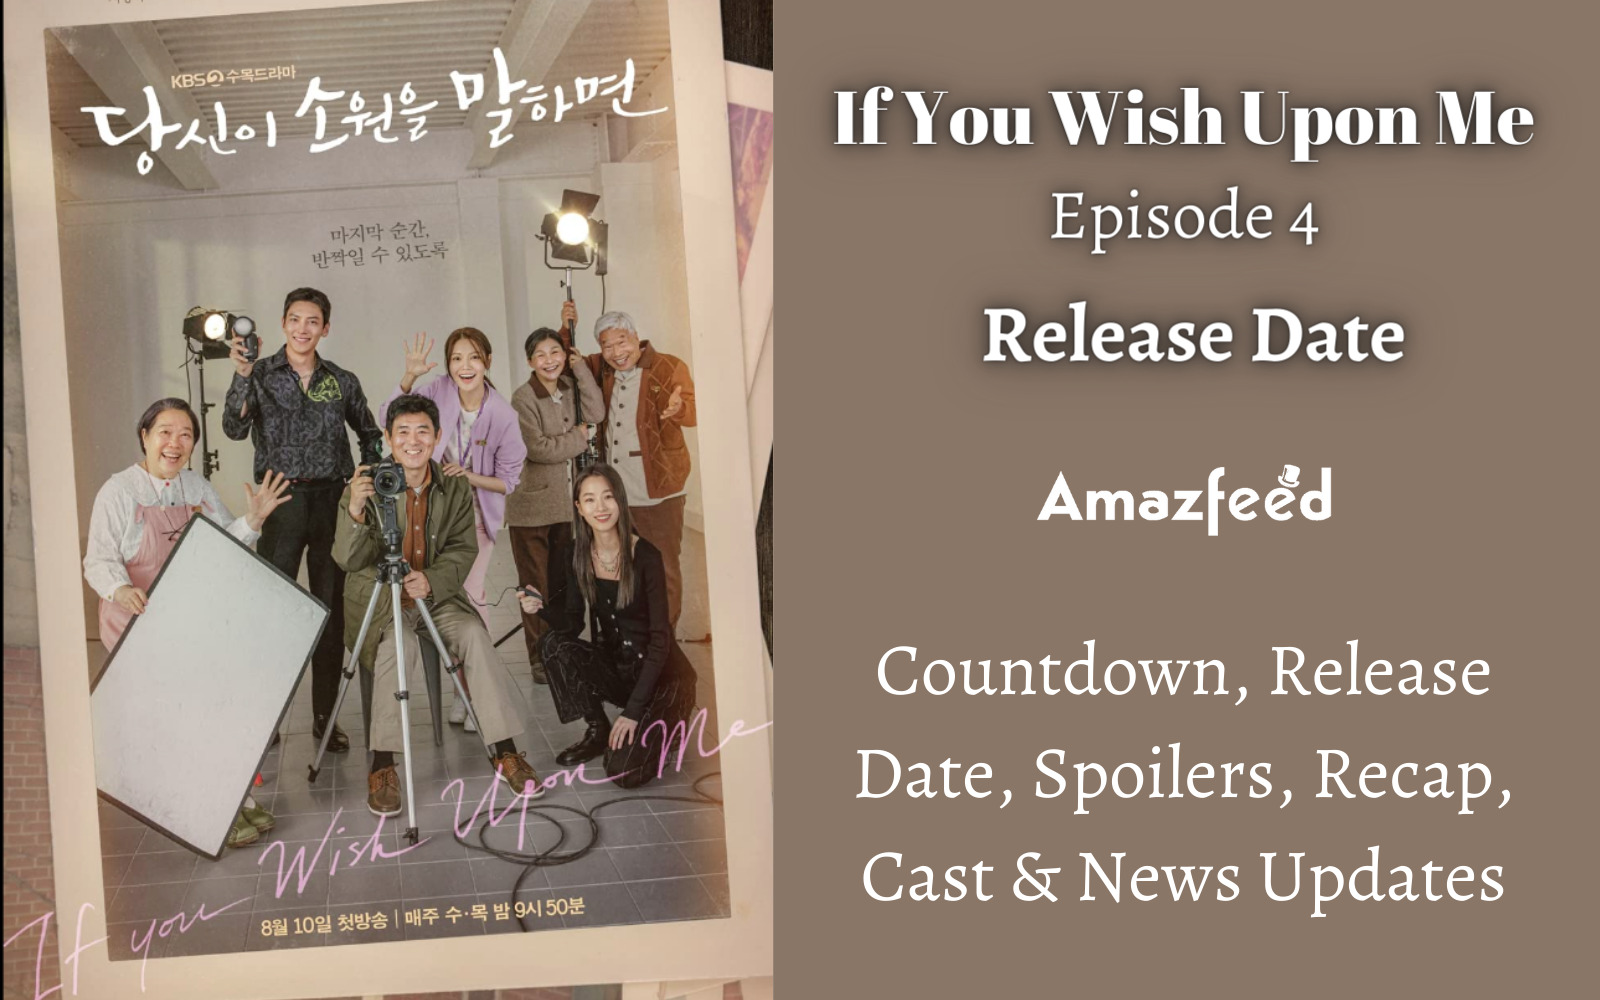 If You Wish Upon Me Season 1 Episode 4 Release Date